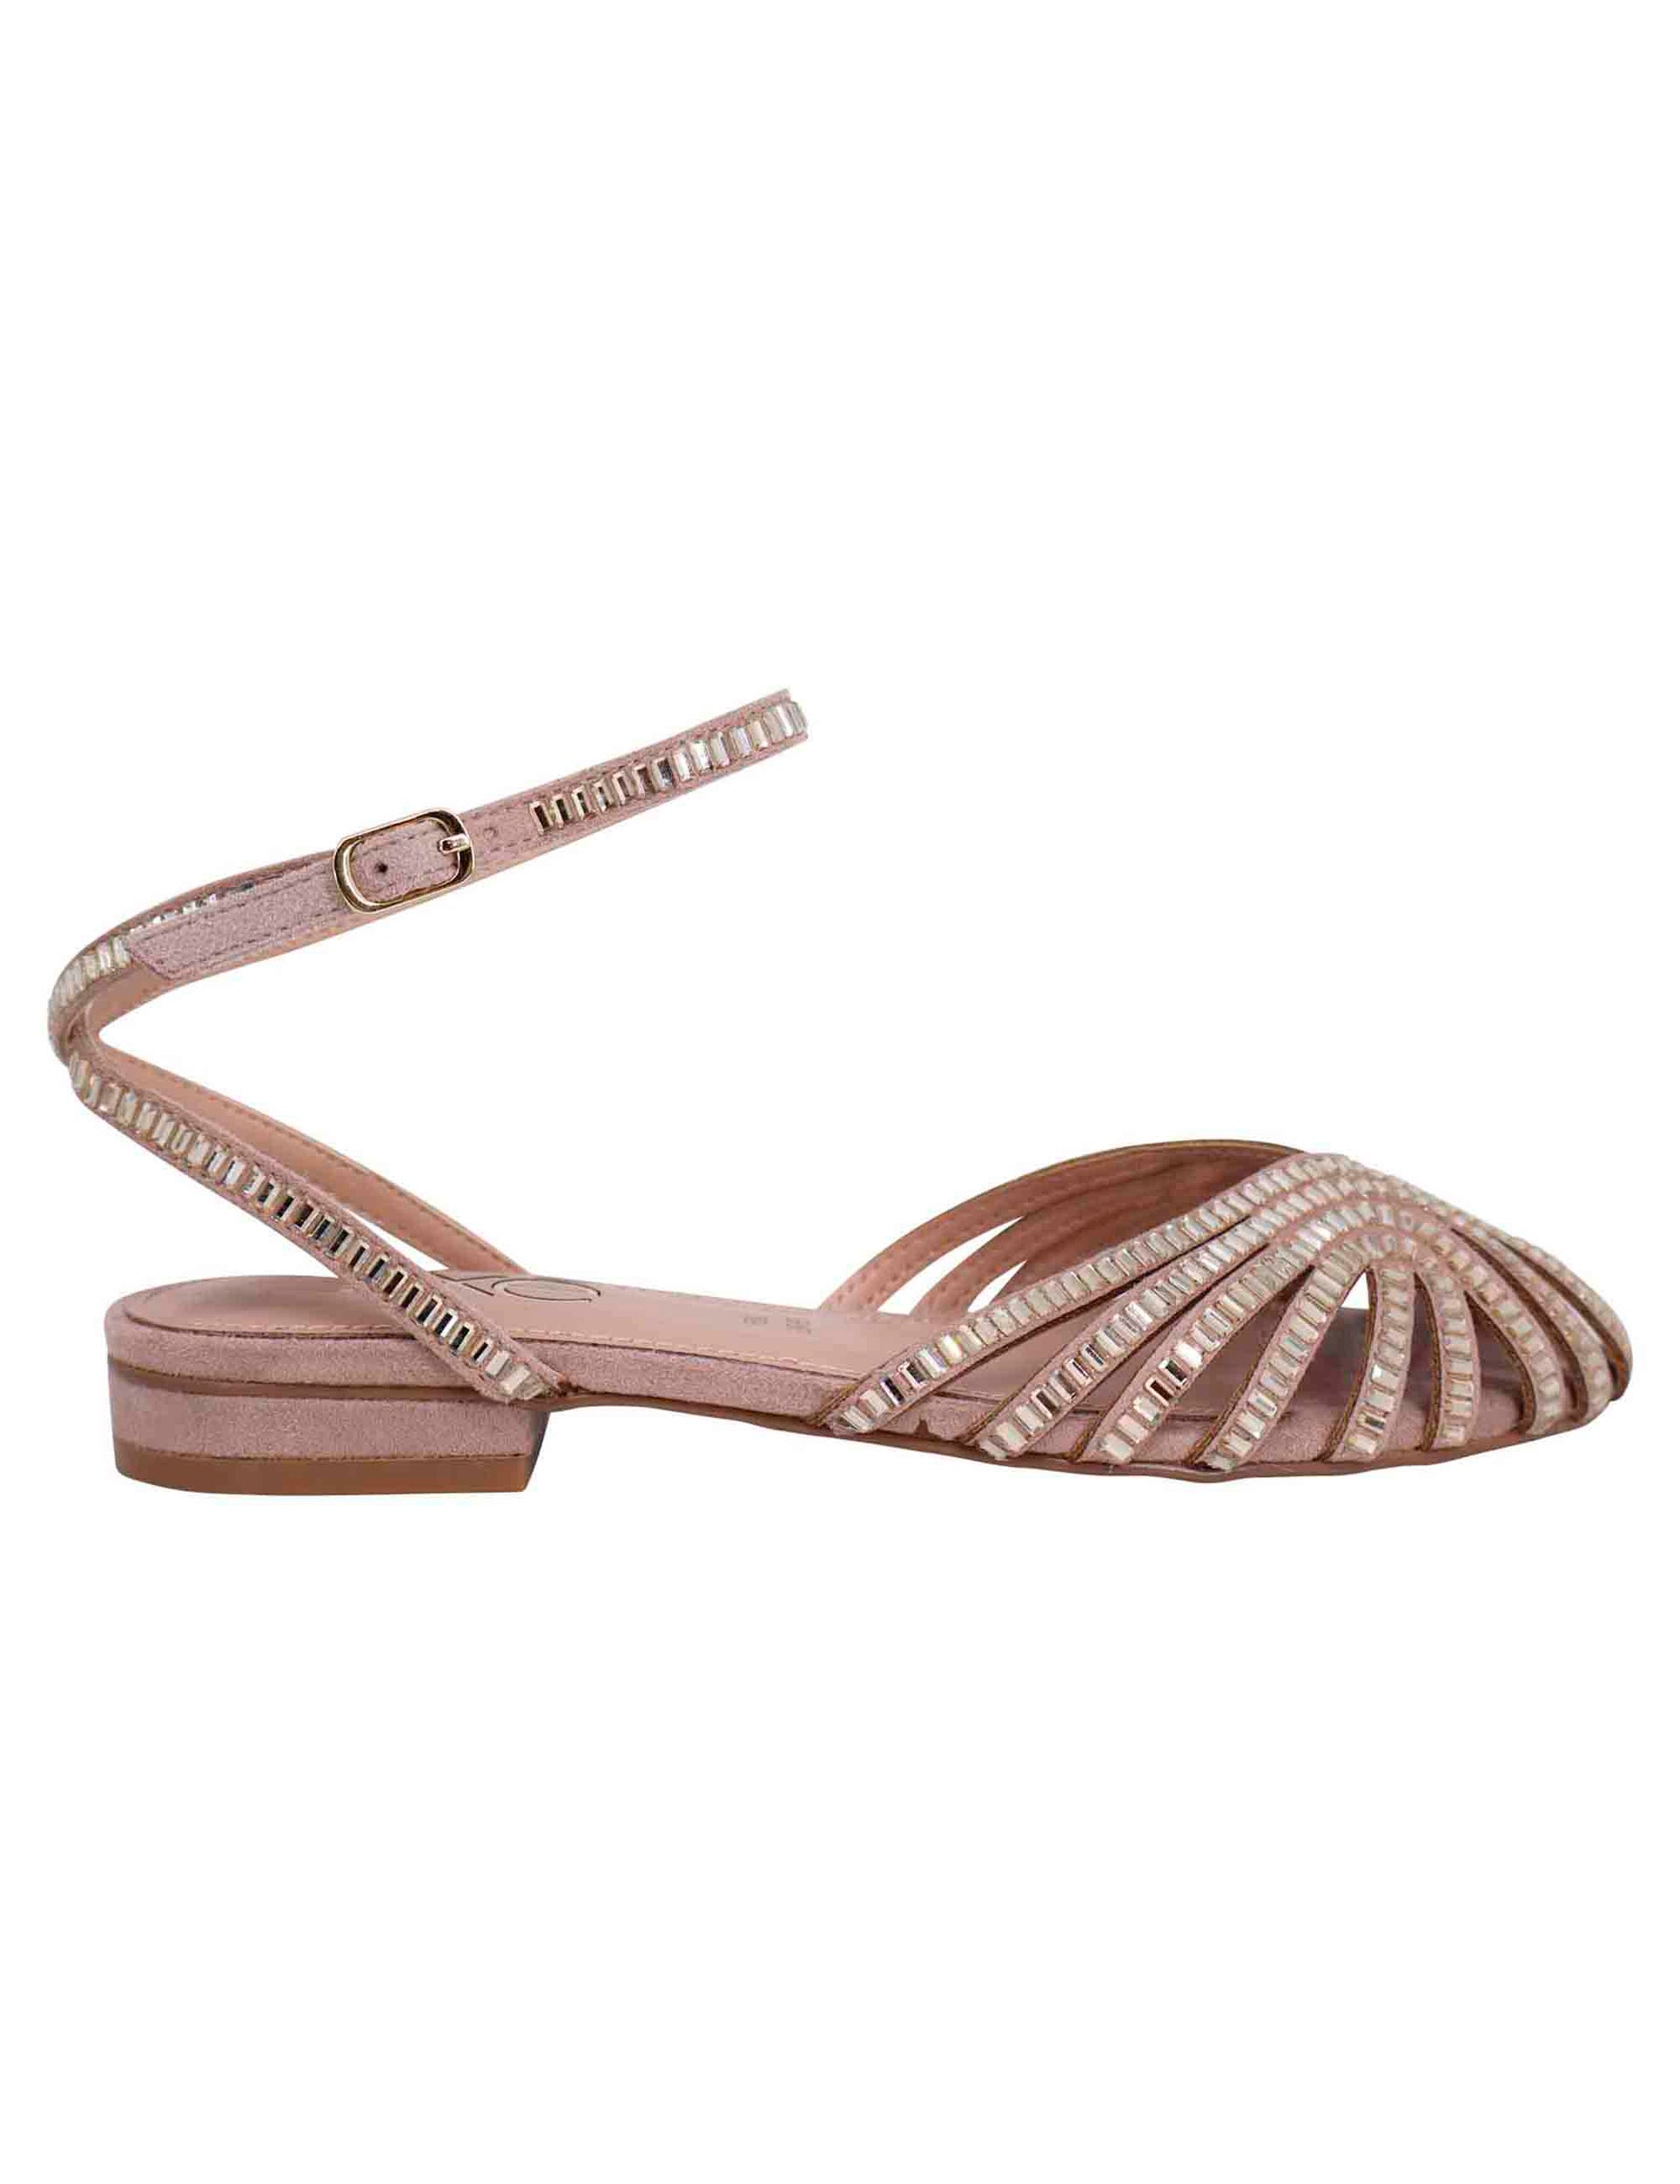 Women's flat sandals in nude fabric with silver stones and ankle strap